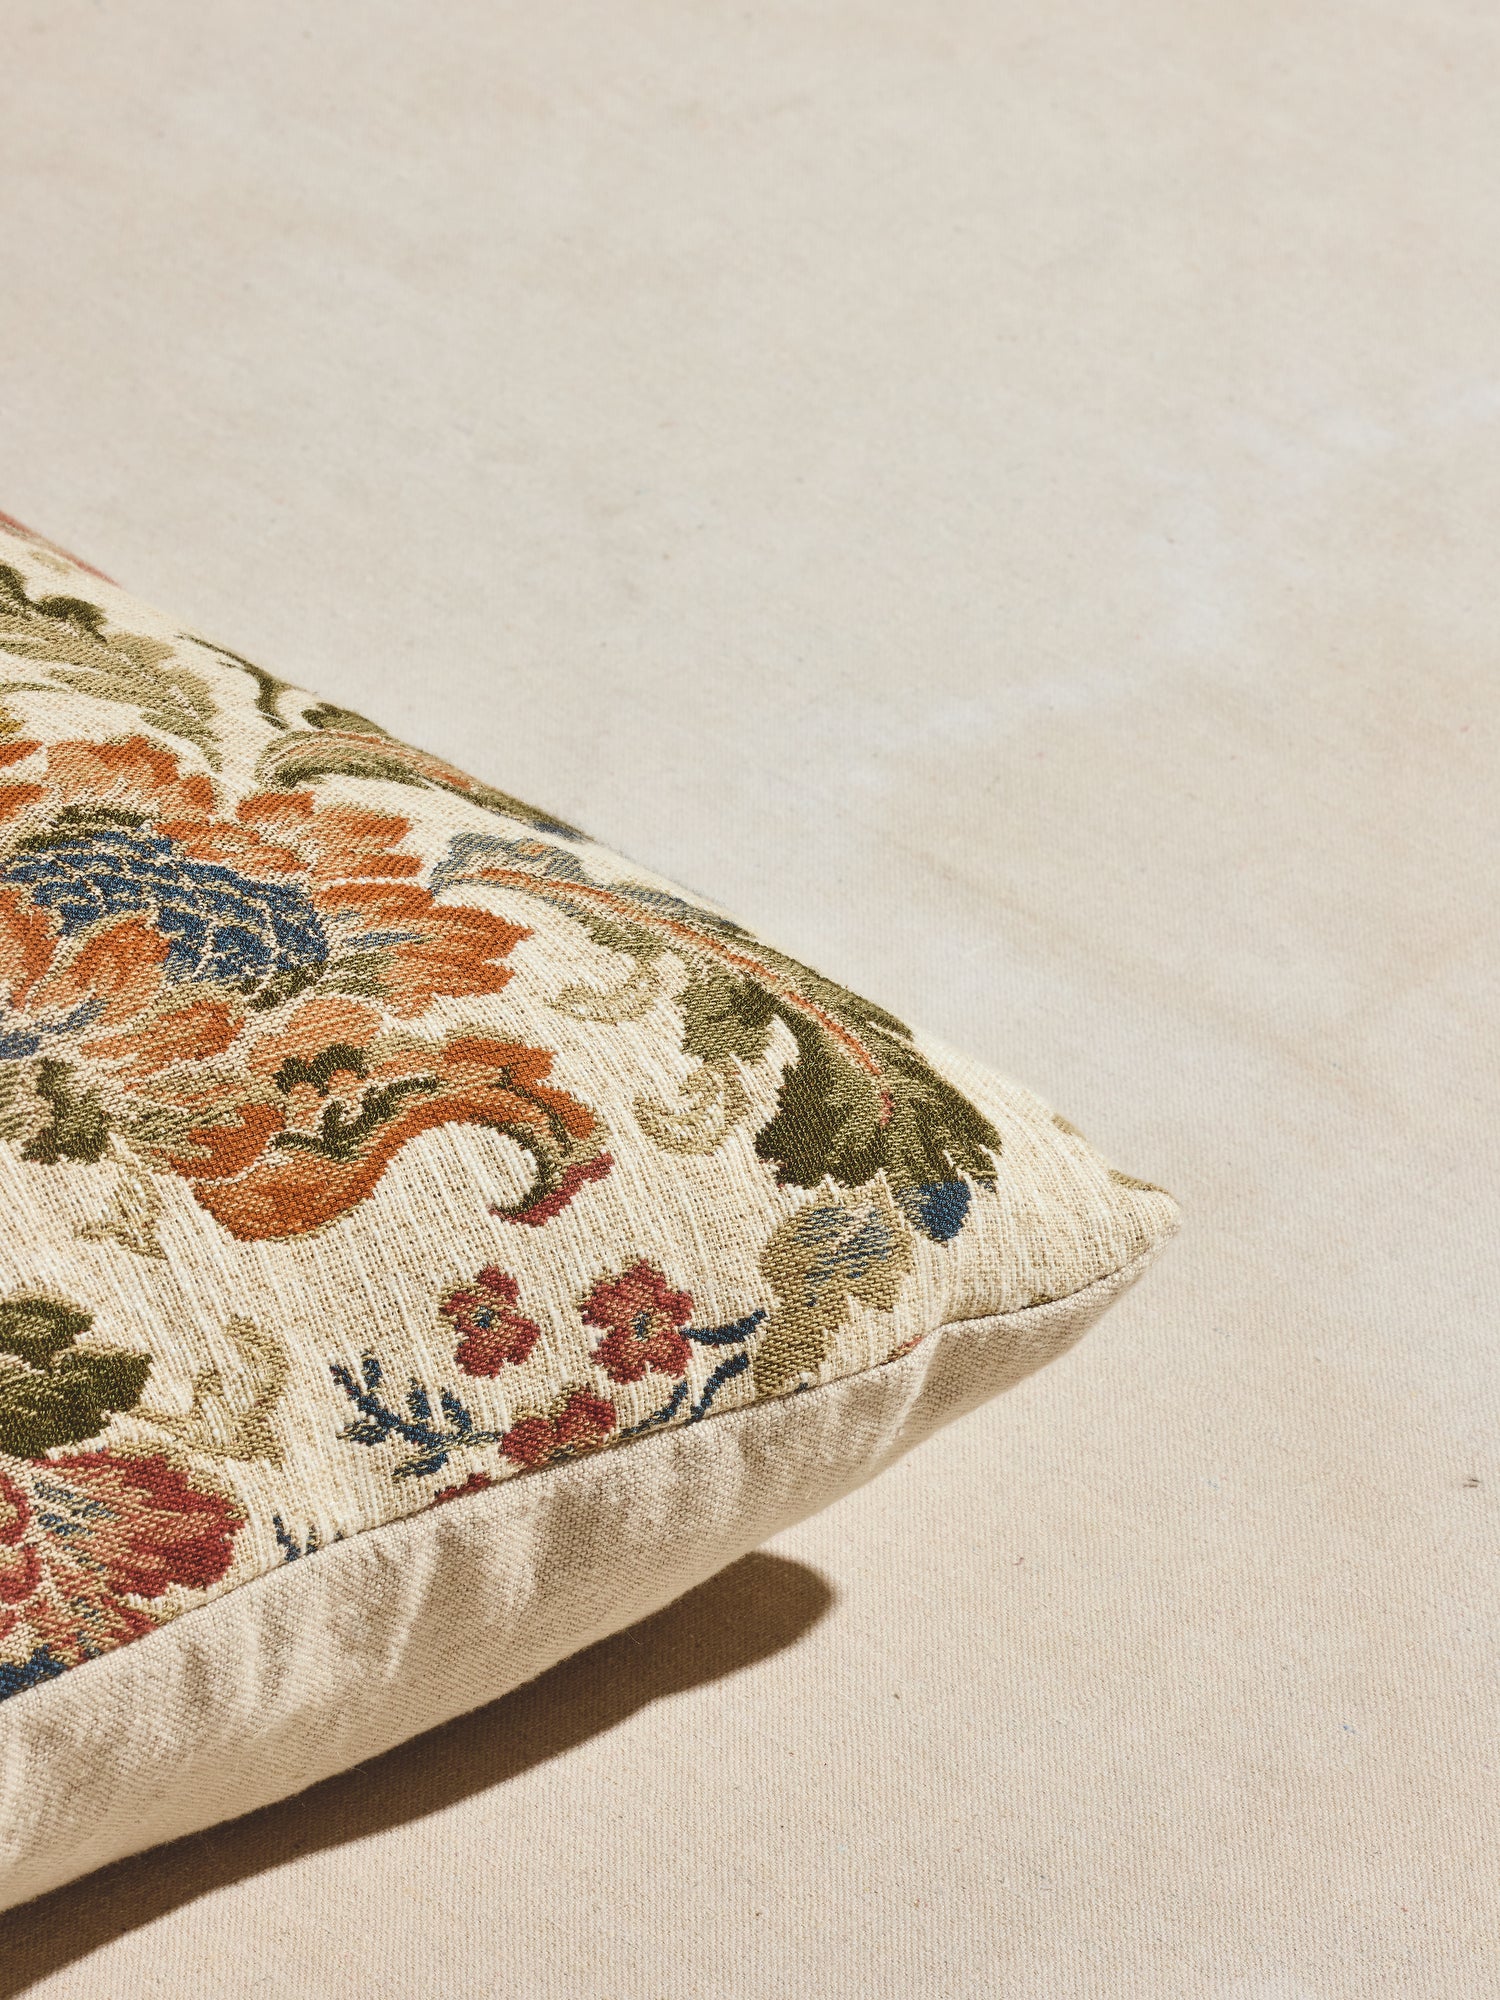 Top woven floral pattern and base natural woven, primavera pillow.